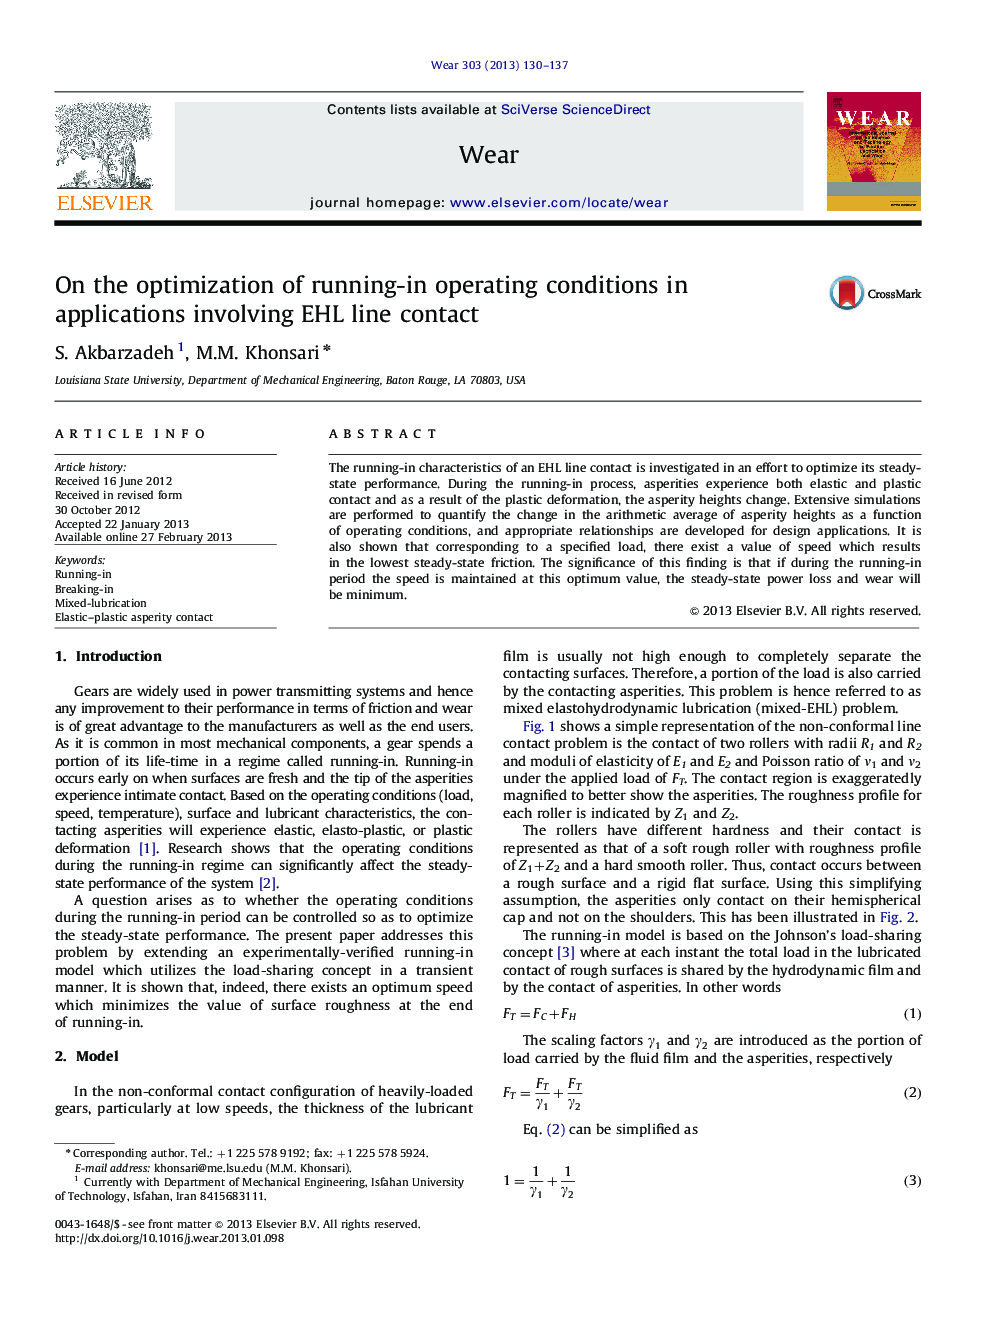 On the optimization of running-in operating conditions in applications involving EHL line contact